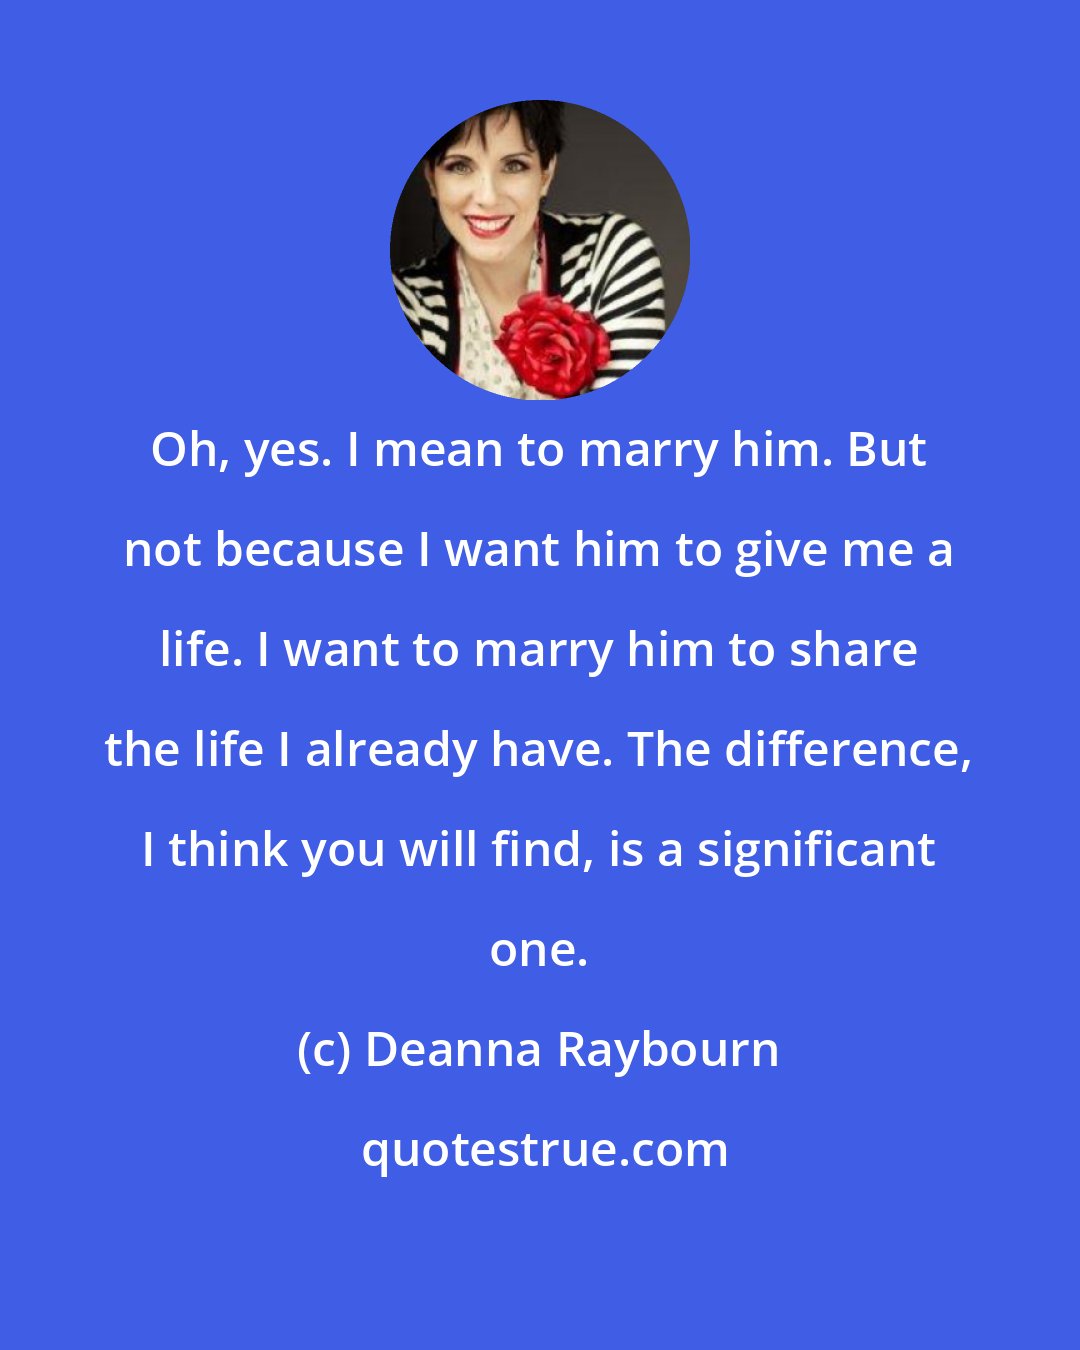 Deanna Raybourn: Oh, yes. I mean to marry him. But not because I want him to give me a life. I want to marry him to share the life I already have. The difference, I think you will find, is a significant one.